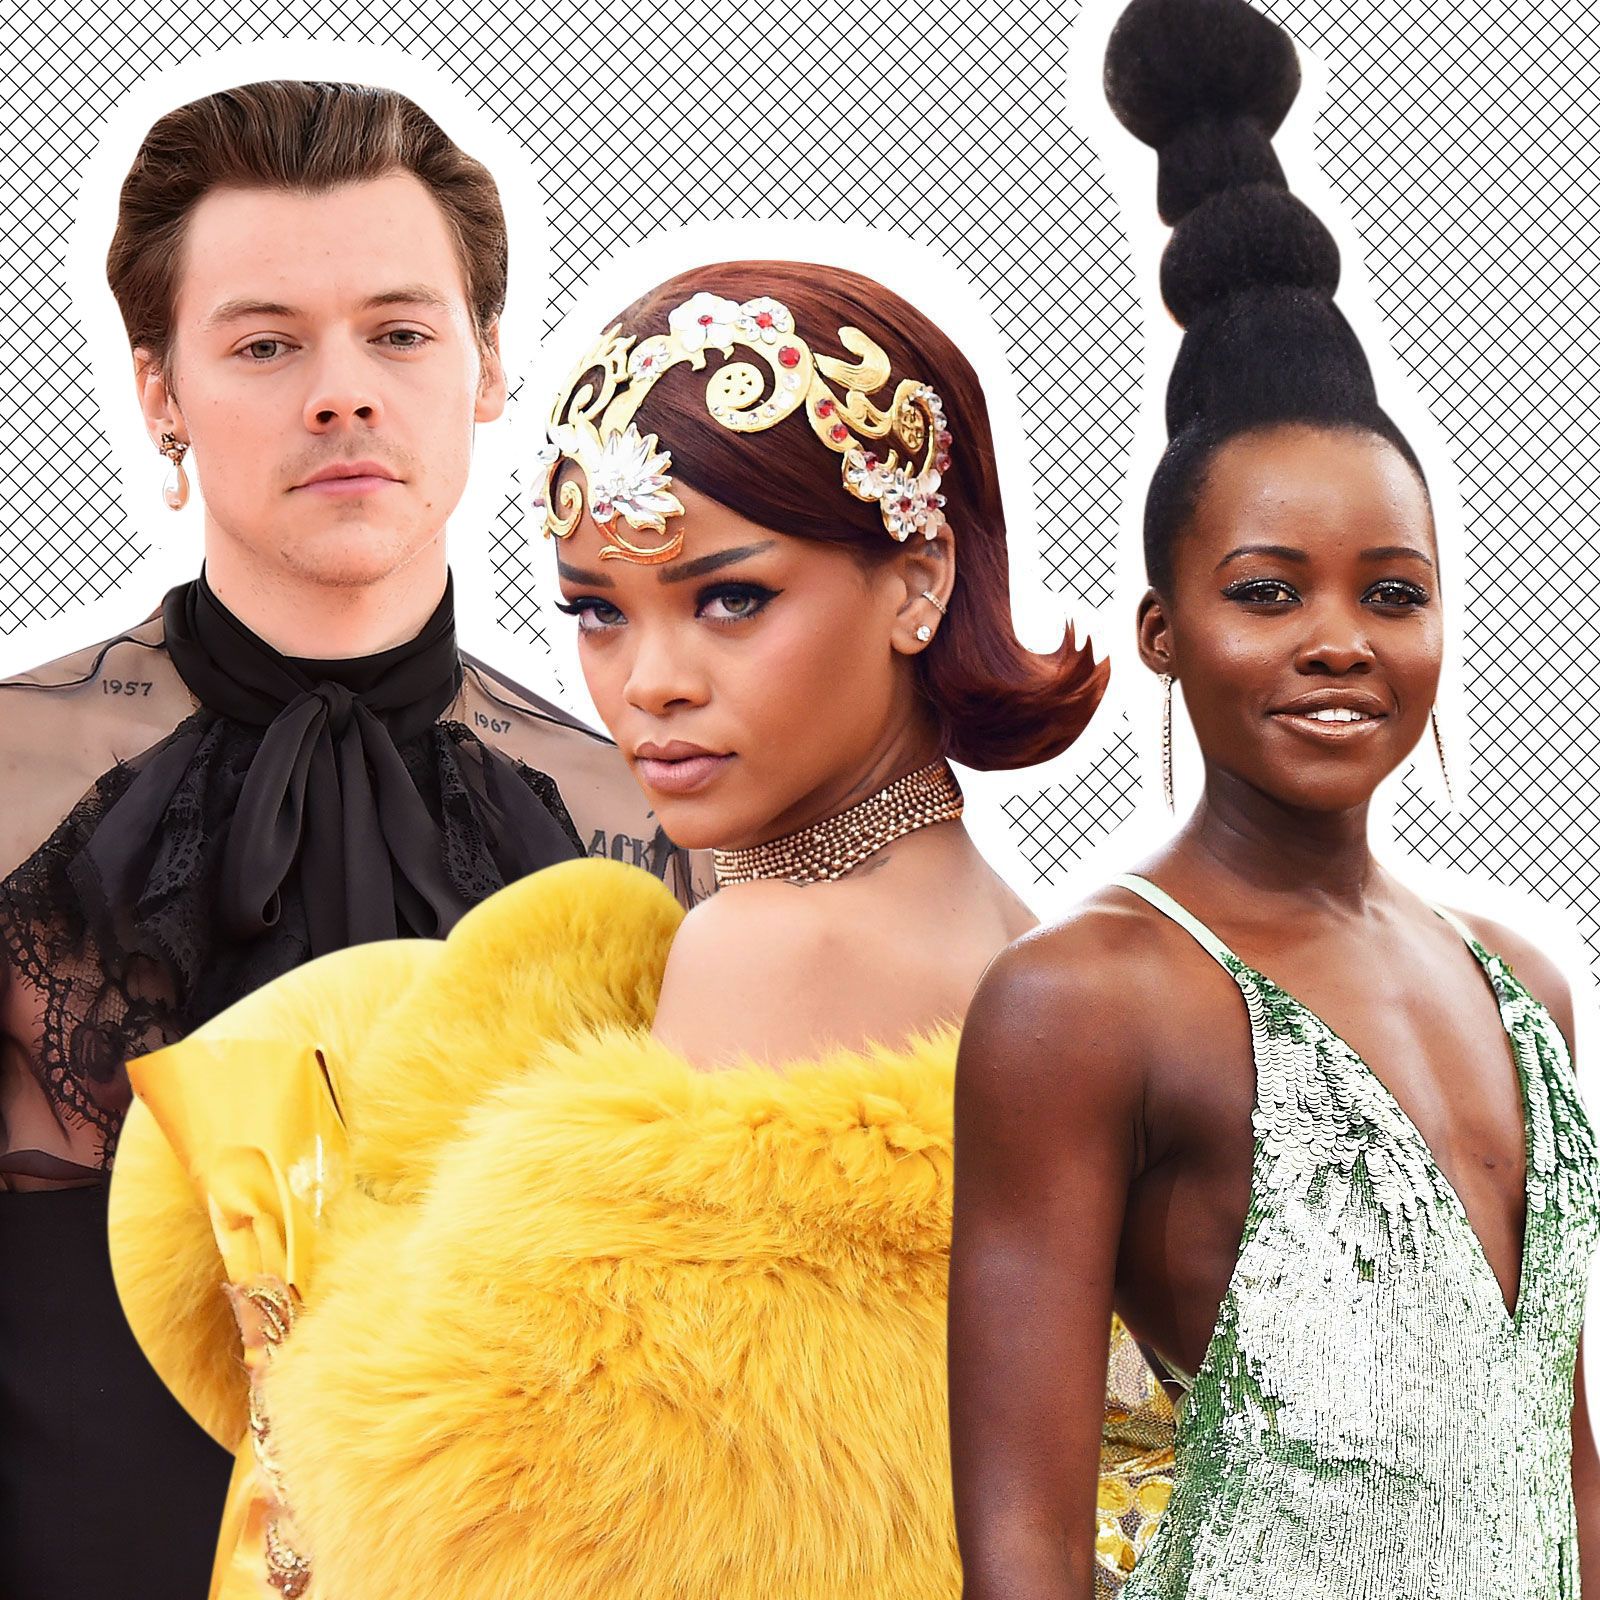 The good, bad and the wacky: the Met Gala's most memorable looks